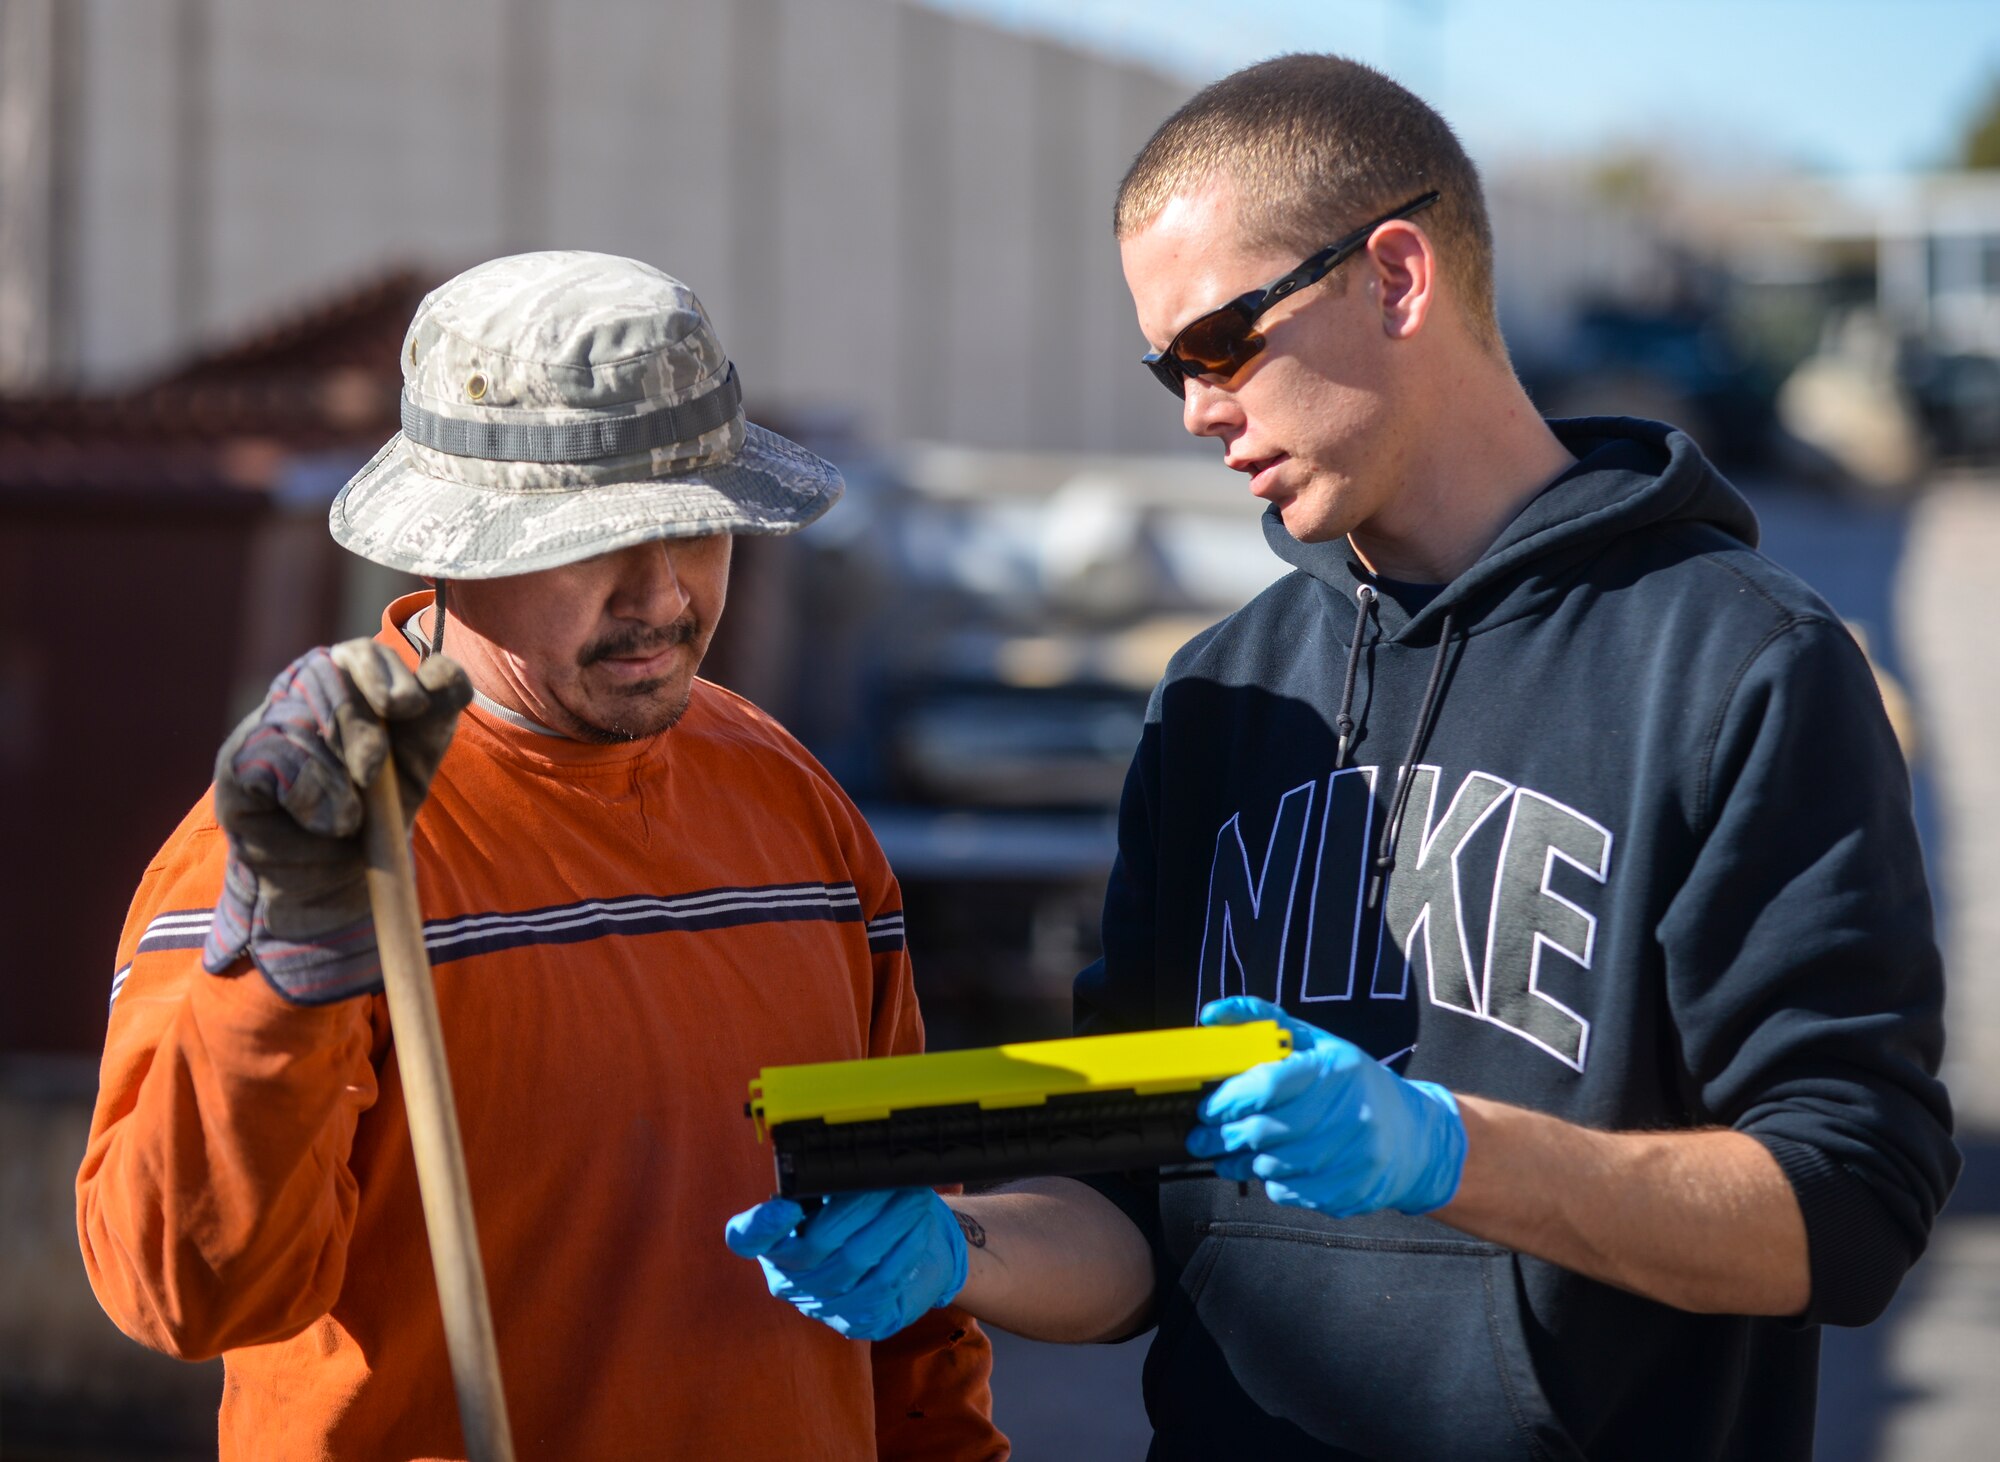 Gamy Manriquez (left), Nellis AFB Recycling Center recycling program manager, instructs where to put recycled goods to Airman 1st Class Douglas Wheeler (right), 823rd Maintenance Squadron HH-60 crew chief, during a volunteer event at the Recycling Center at Nellis Air Force Base, Nev., Jan. 26, 2016,. Volunteering is a passion for Wheeler and orchestrated the volunteer event at the Recycling Center for his squadron. (U.S. Air Force photo by Airman 1st Class Kevin Tanenbaum)